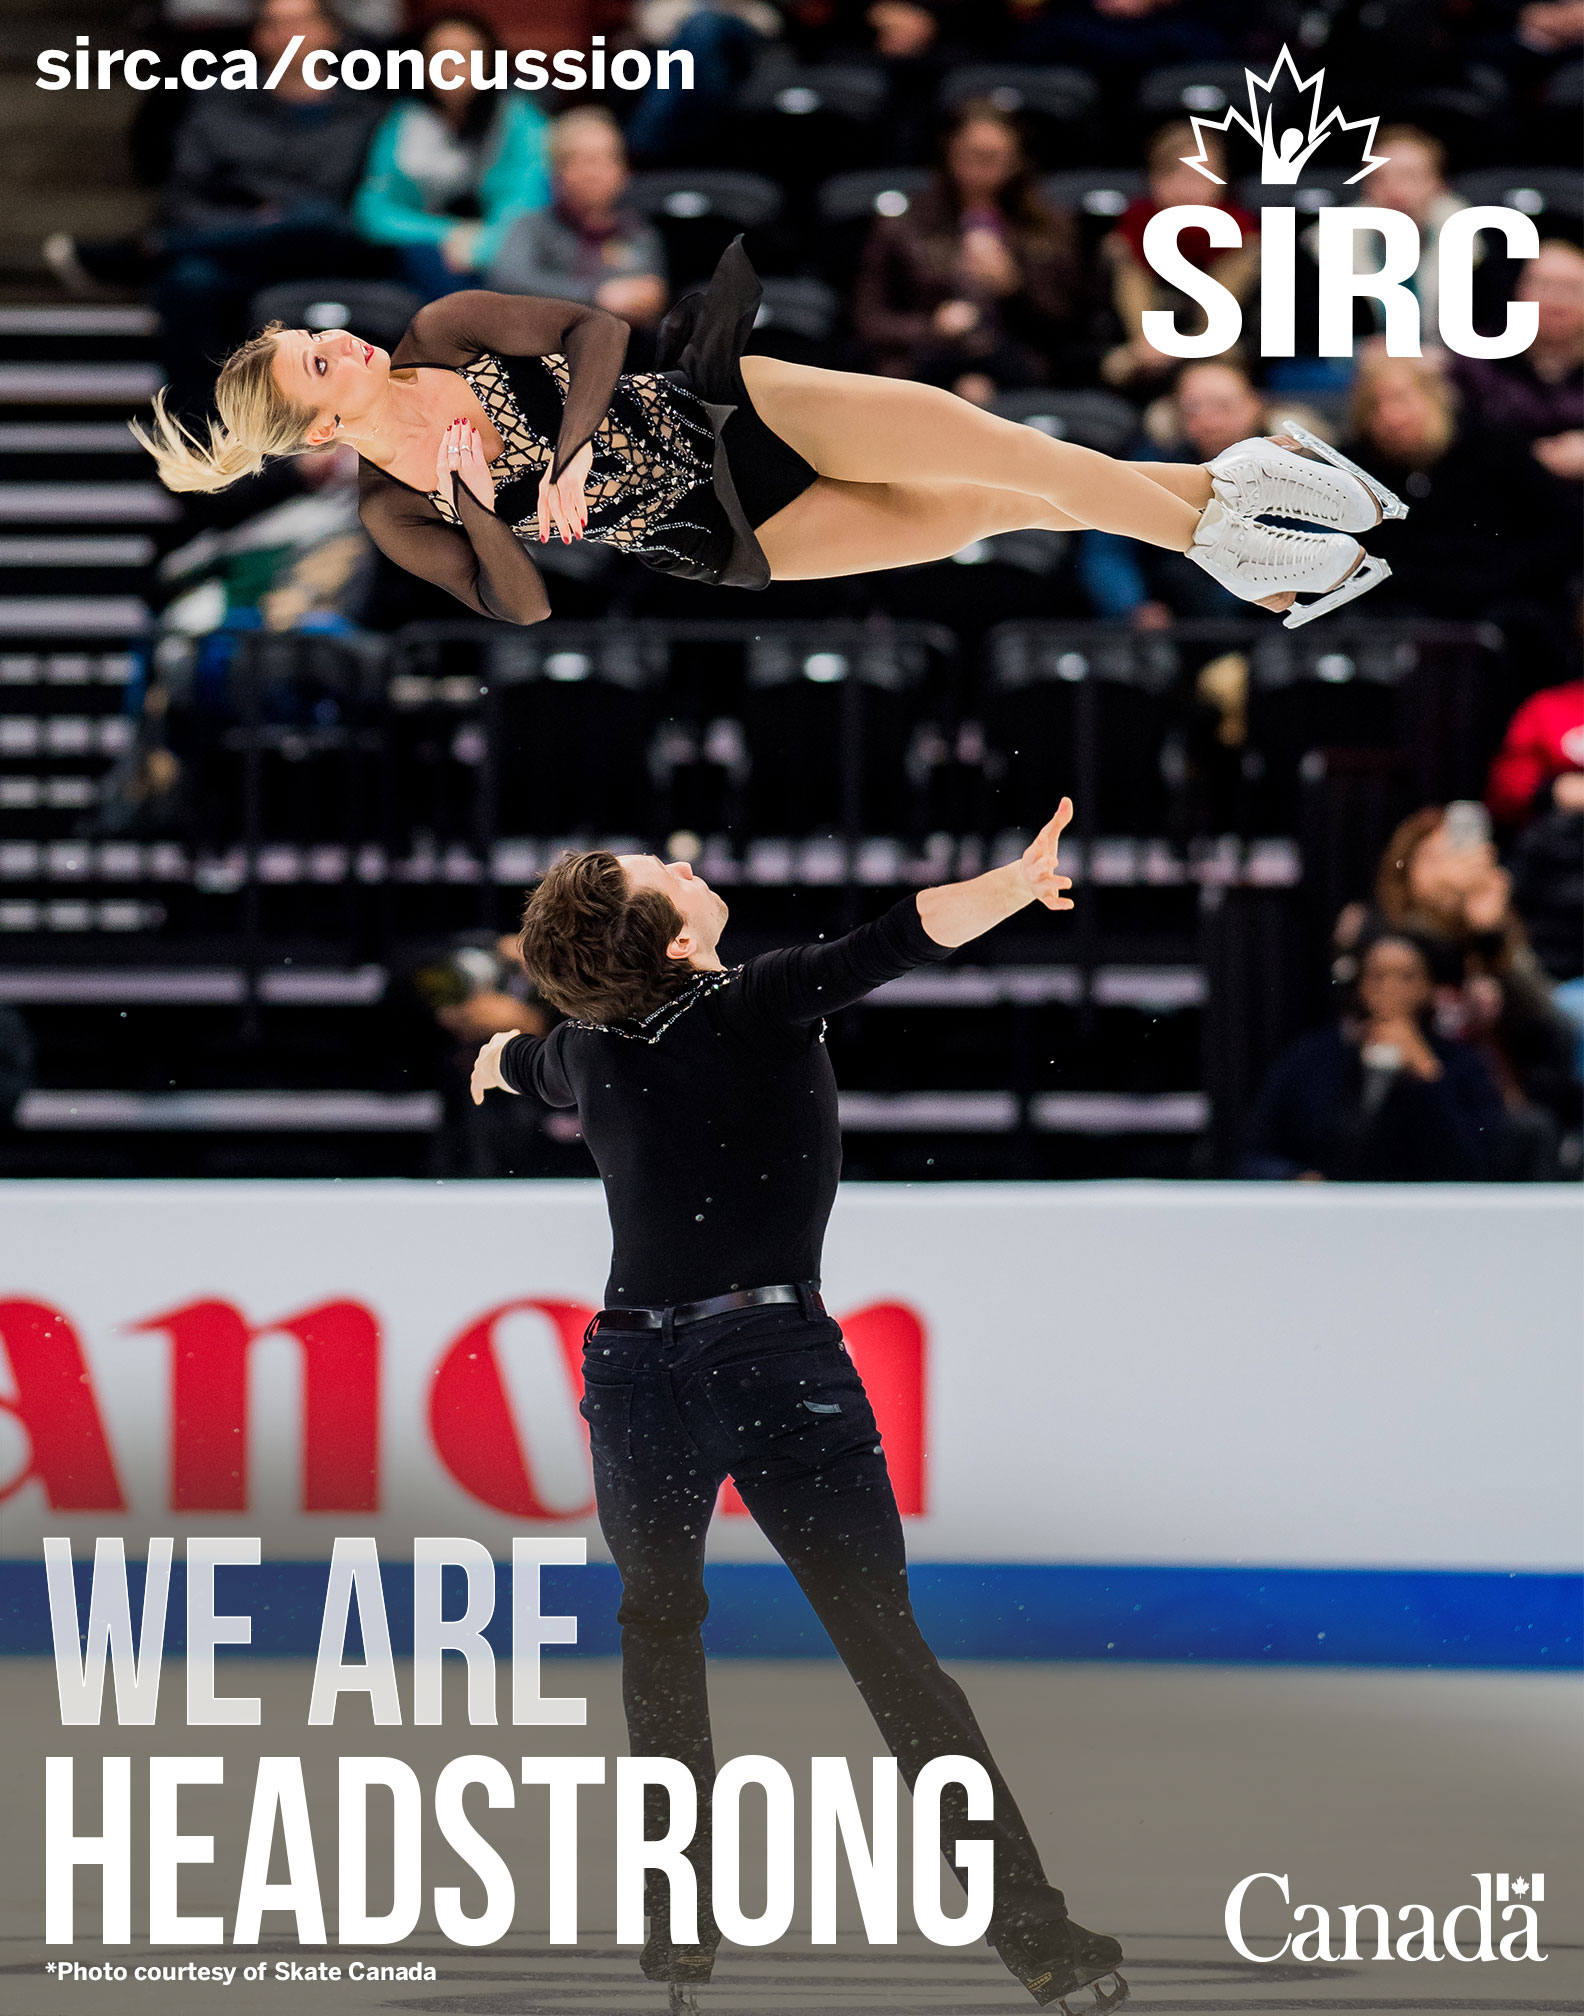 Photo of figure skaters